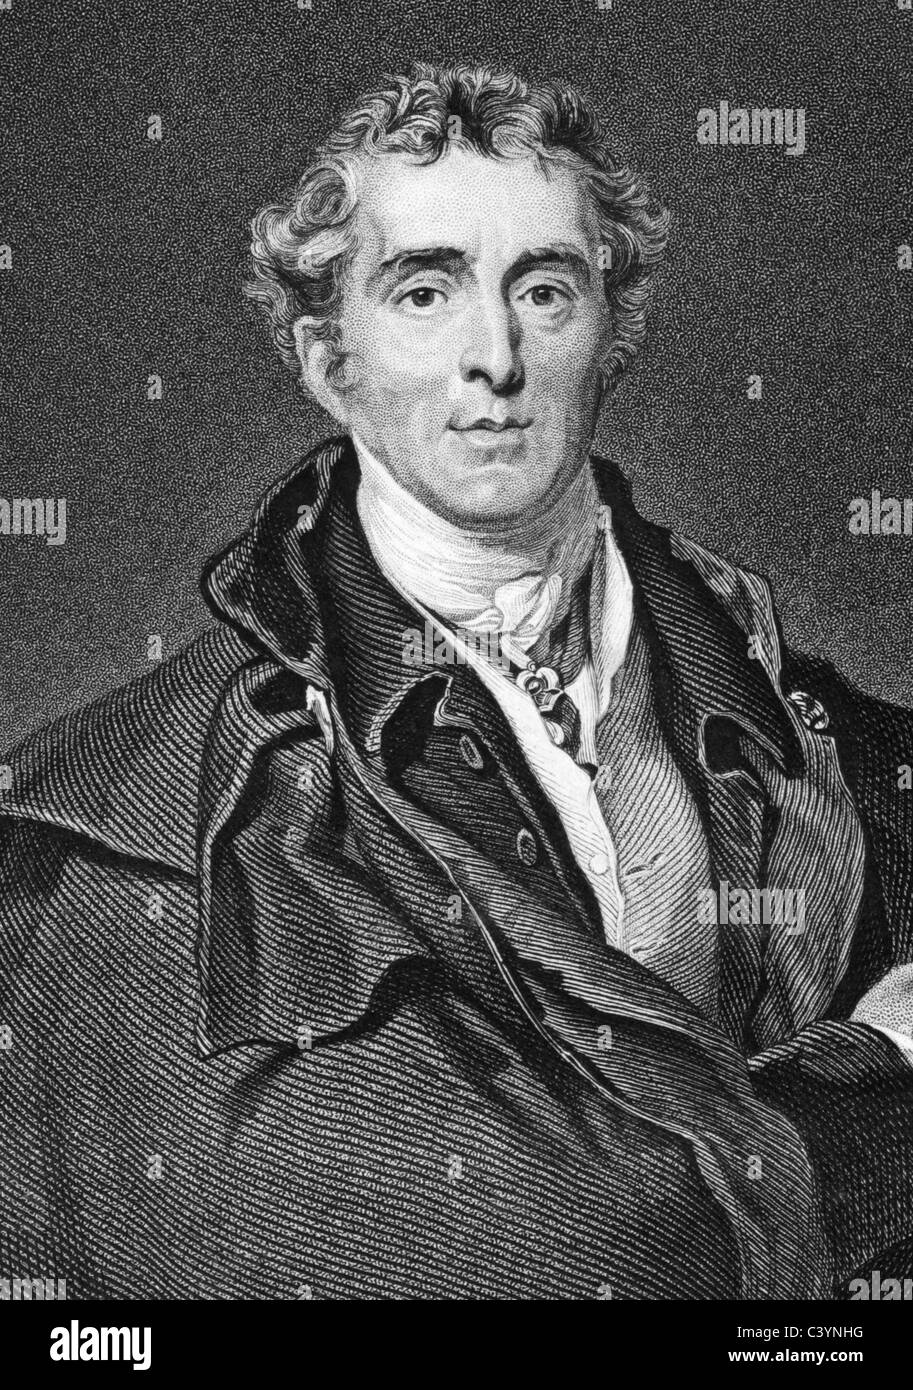 Arthur Wellesley, 1st Duke of Wellington (1769-1852) on engraving from 1800s. Soldier and statesman. Stock Photo